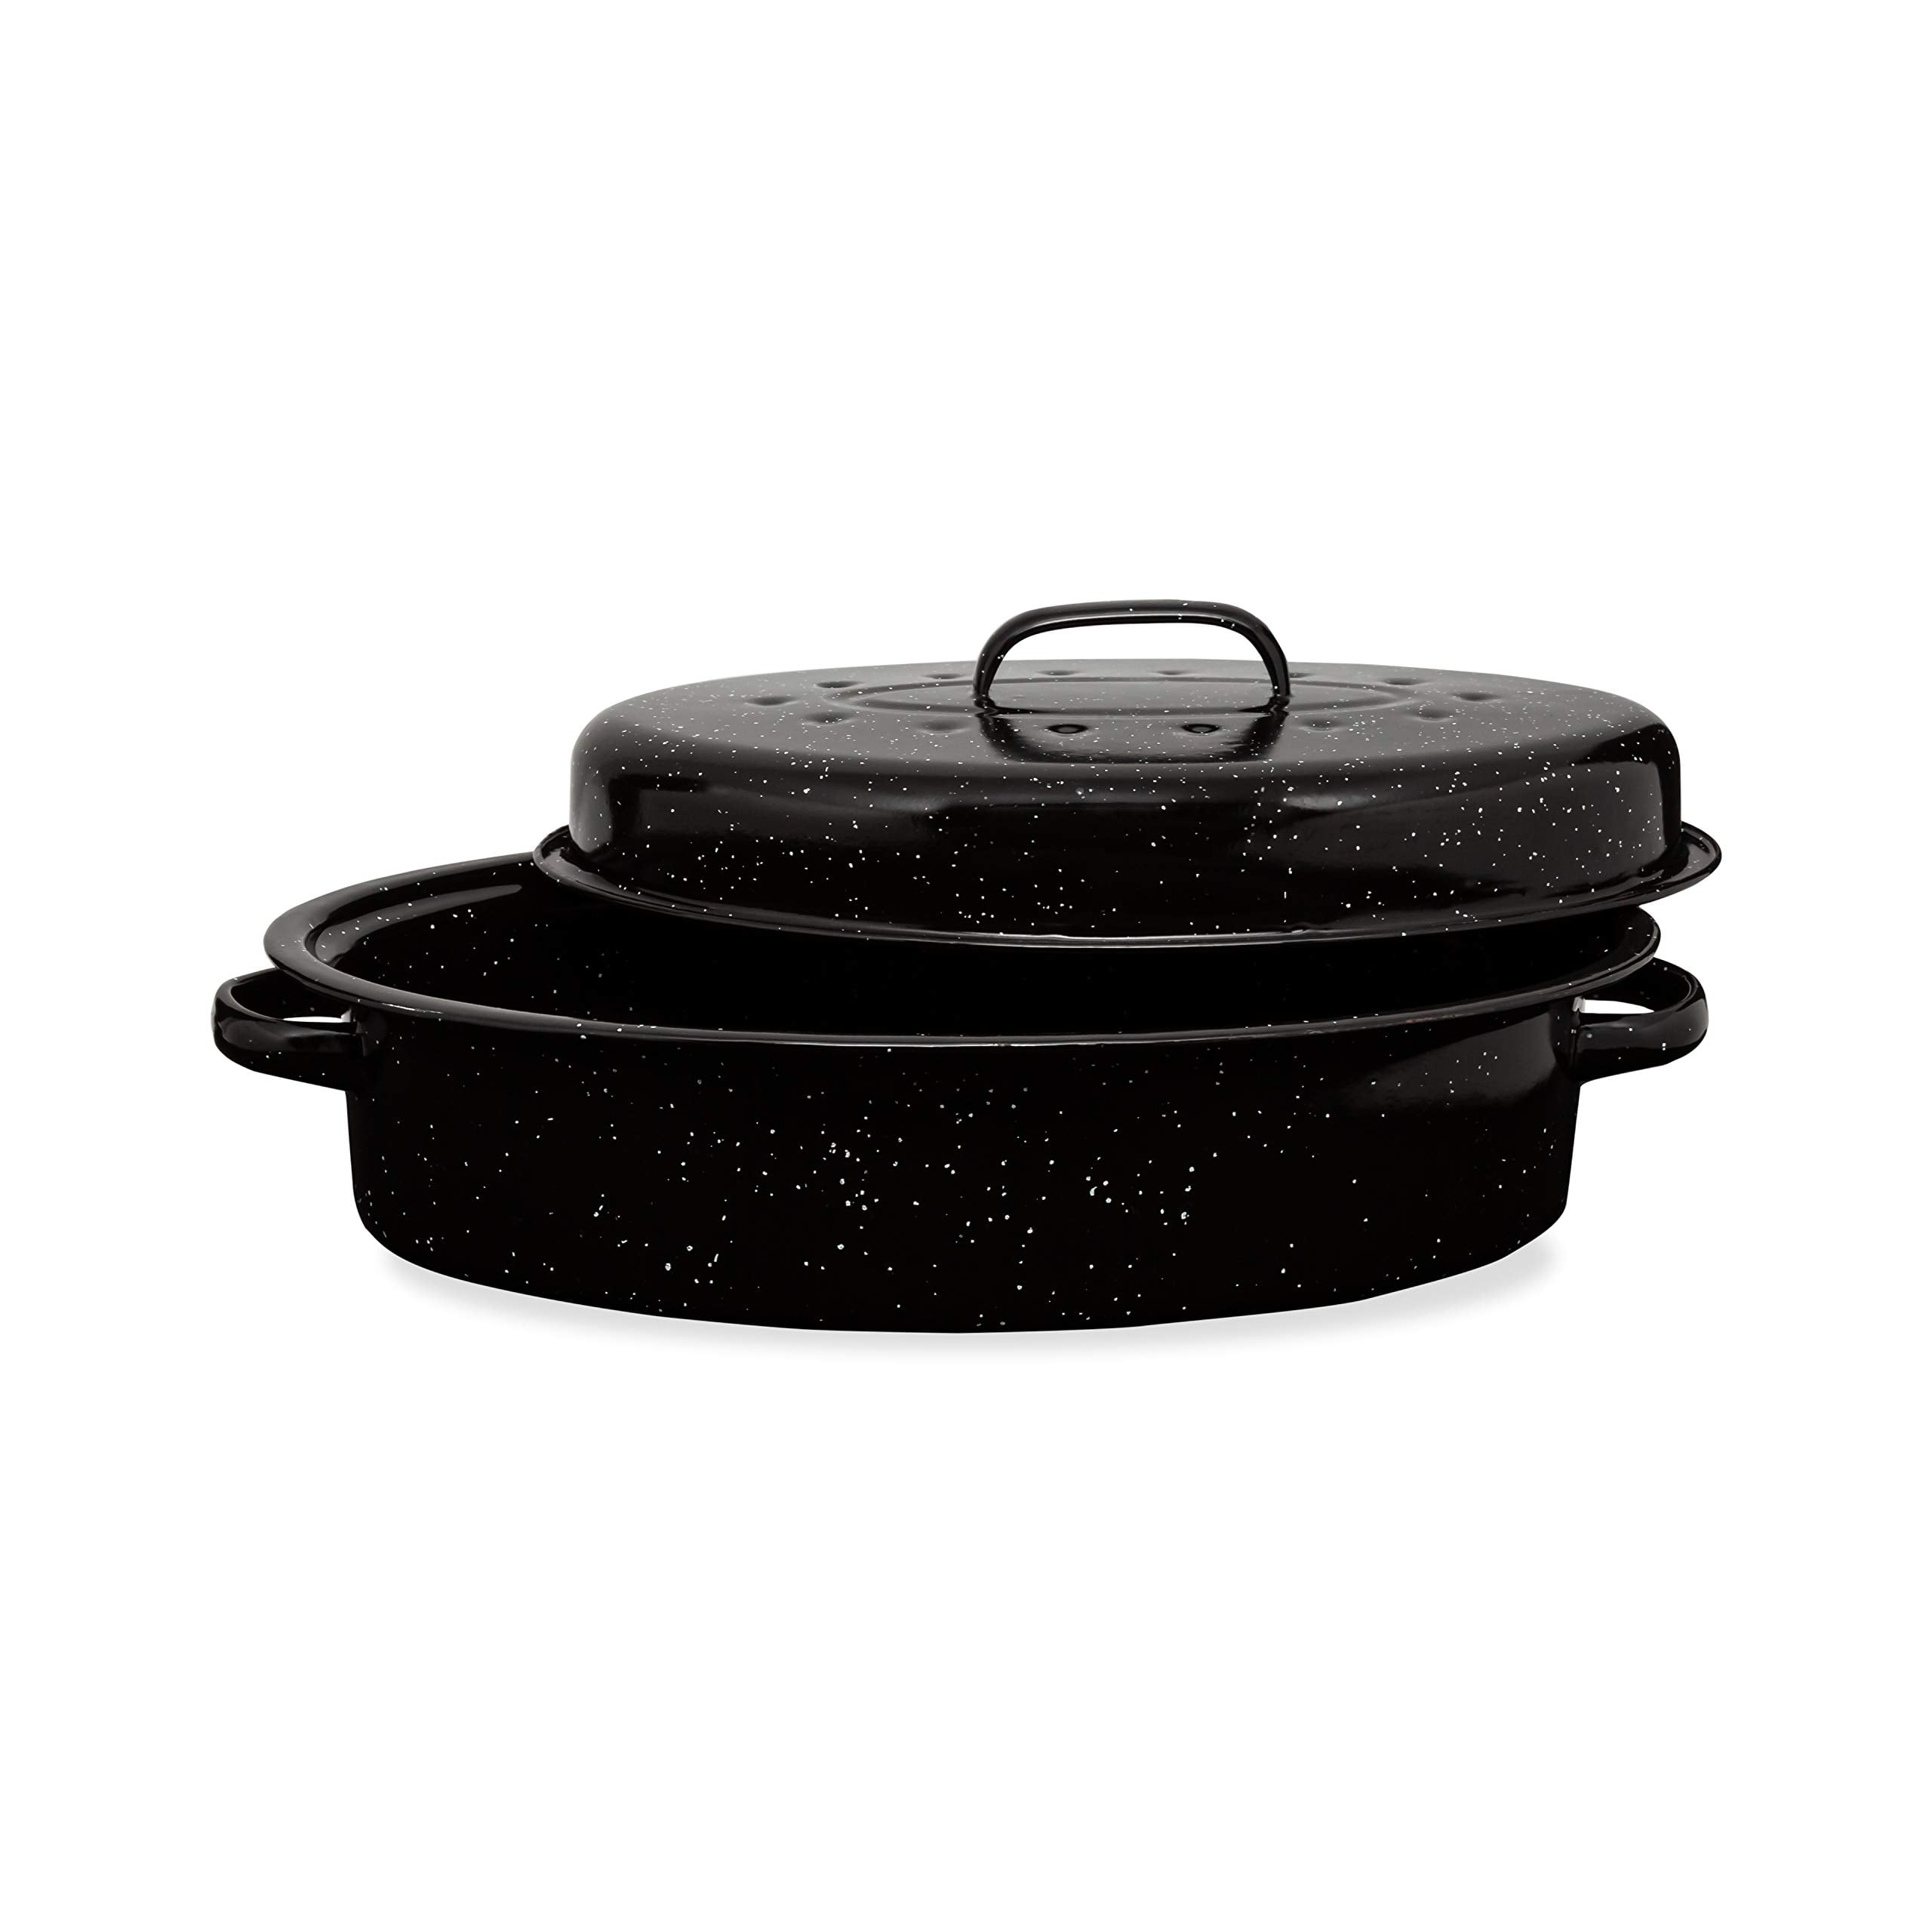 Granite Ware Covered Oval Roaster 13 inches 